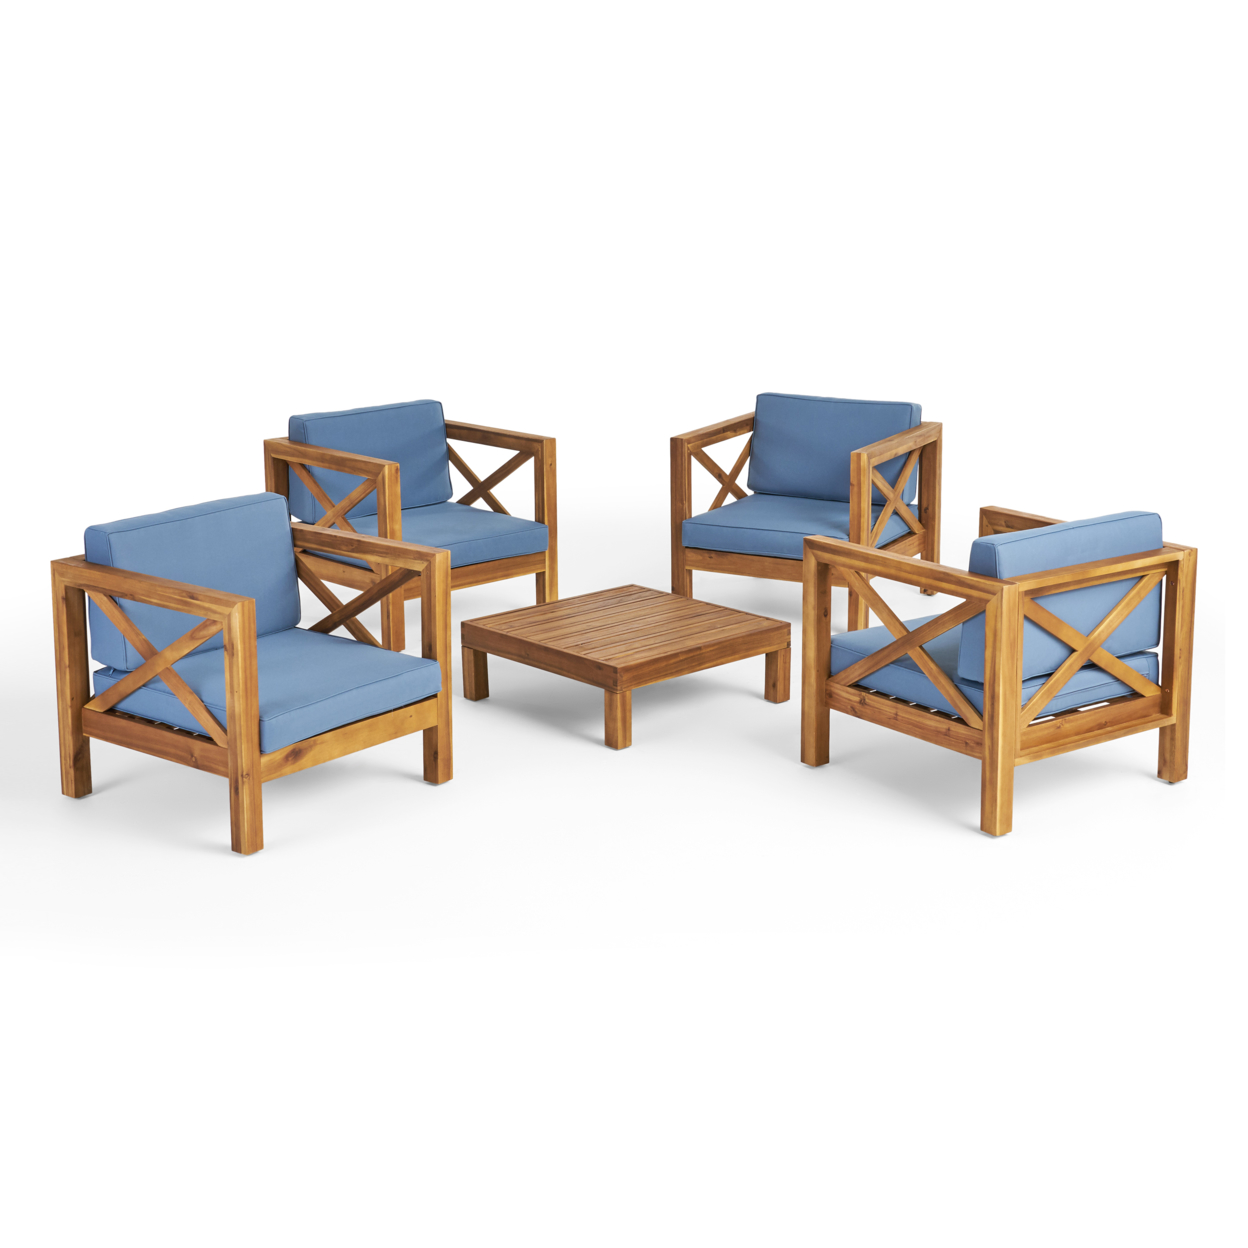 Morgan Outdoor 4 Seater Acacia Wood Club Chair And Coffee Table Set - Teak Finish + Red